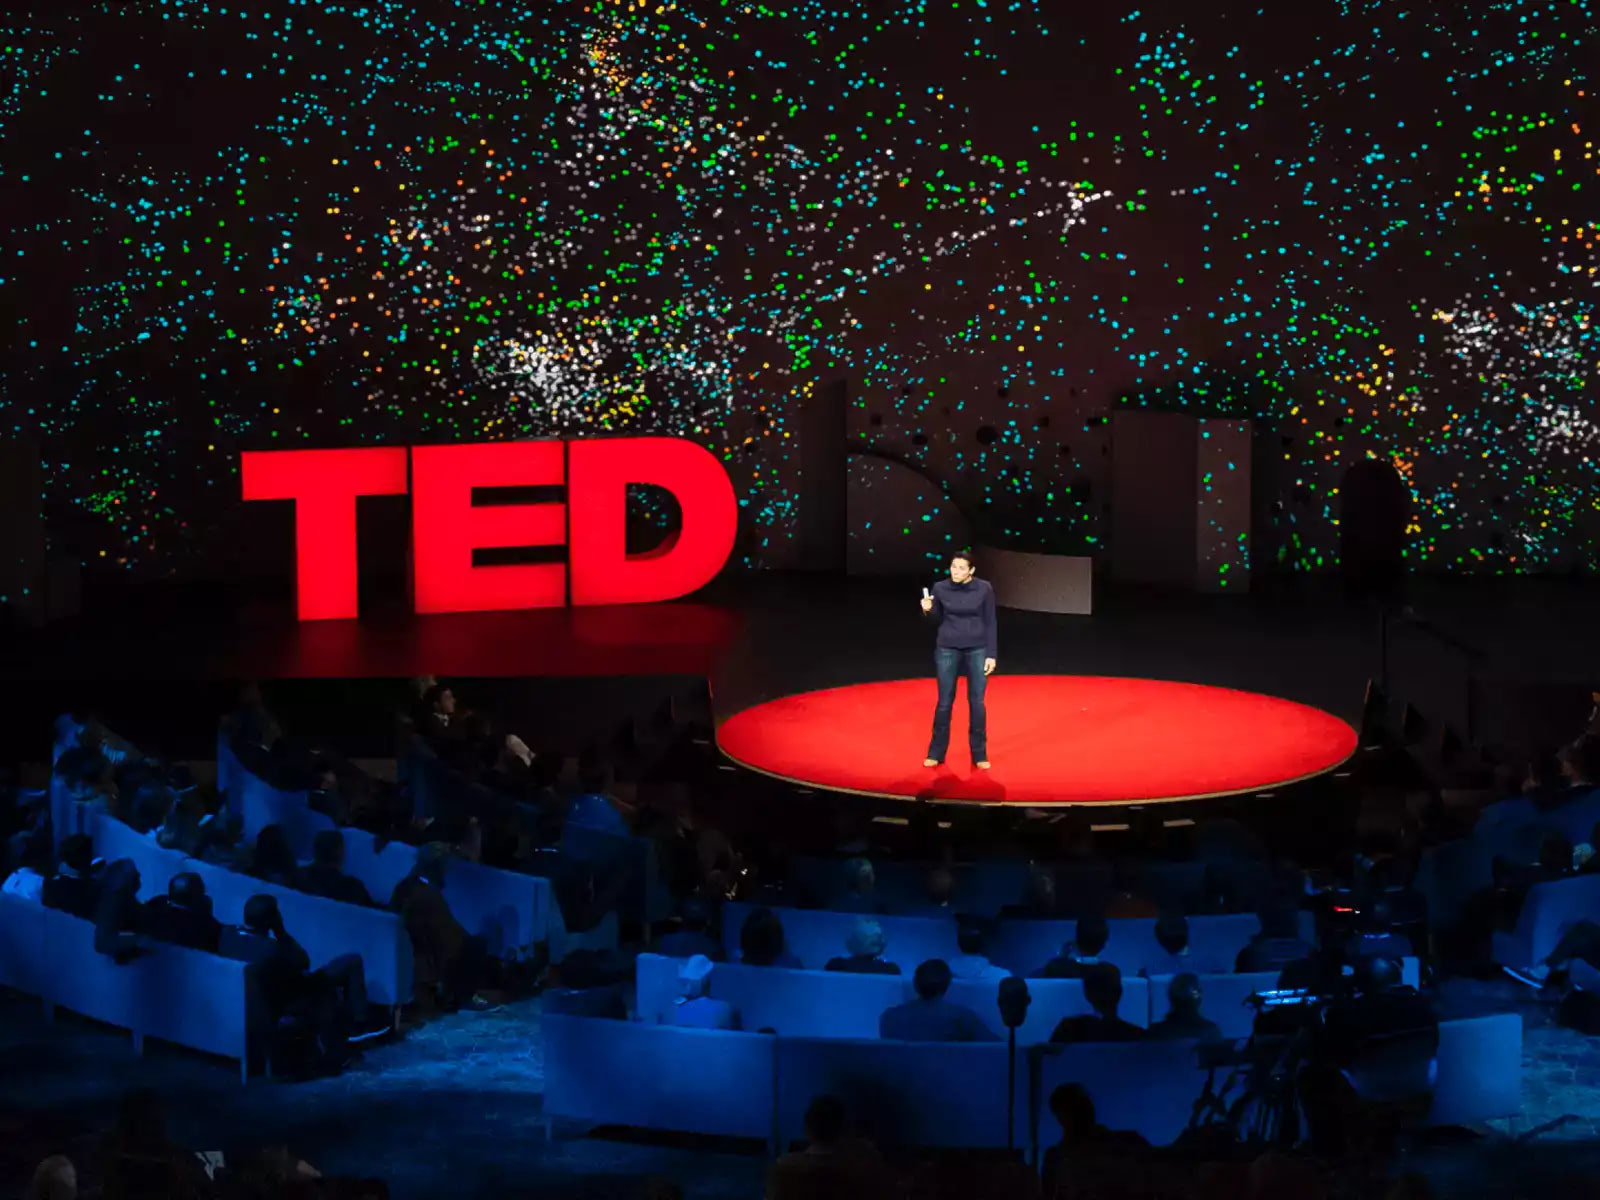 TED talk stage